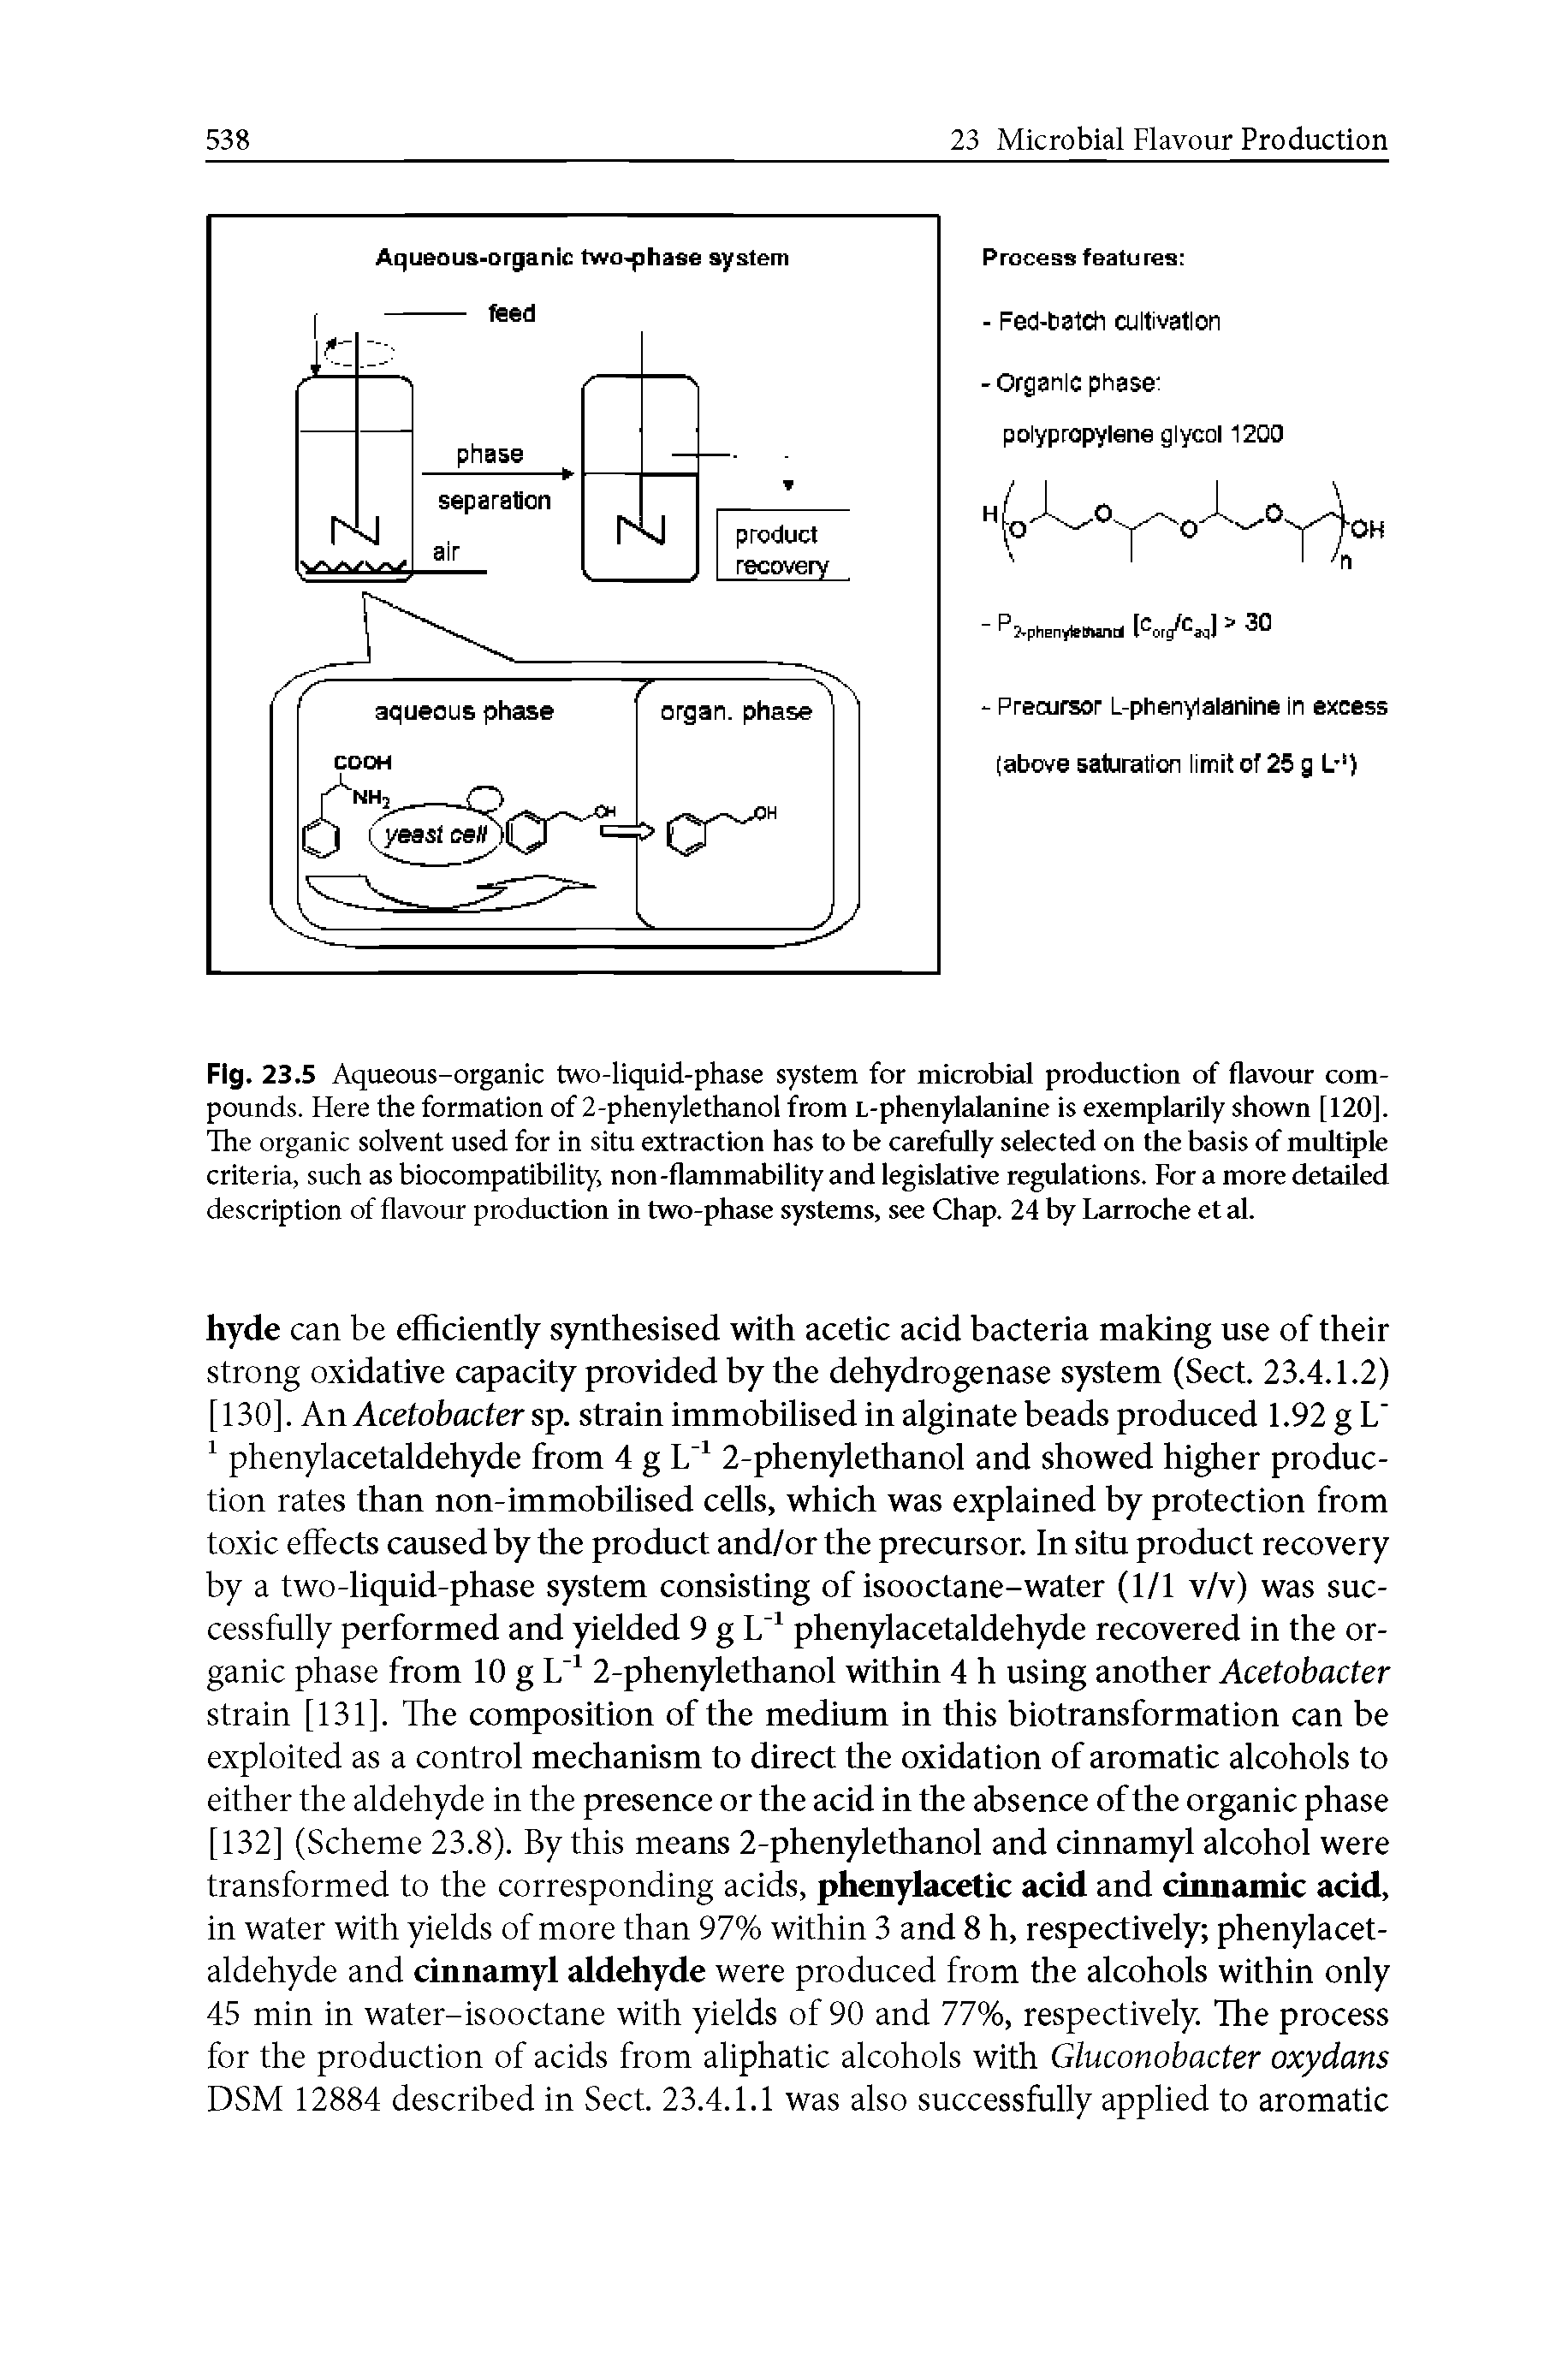 Fig. 23.5 Aqueous-organic two-liquid-phase system for microbial production of flavour compounds. Here the formation of 2-phenylethanol from L-phenylalanine is exemplarily shown [120]. The organic solvent used for in situ extraction has to be carefully selected on the basis of multiple criteria, such as biocompatibility, non-flammability and legislative regulations. For a more detailed description of flavour production in two-phase systems, see Chap. 24 by Larroche et al.